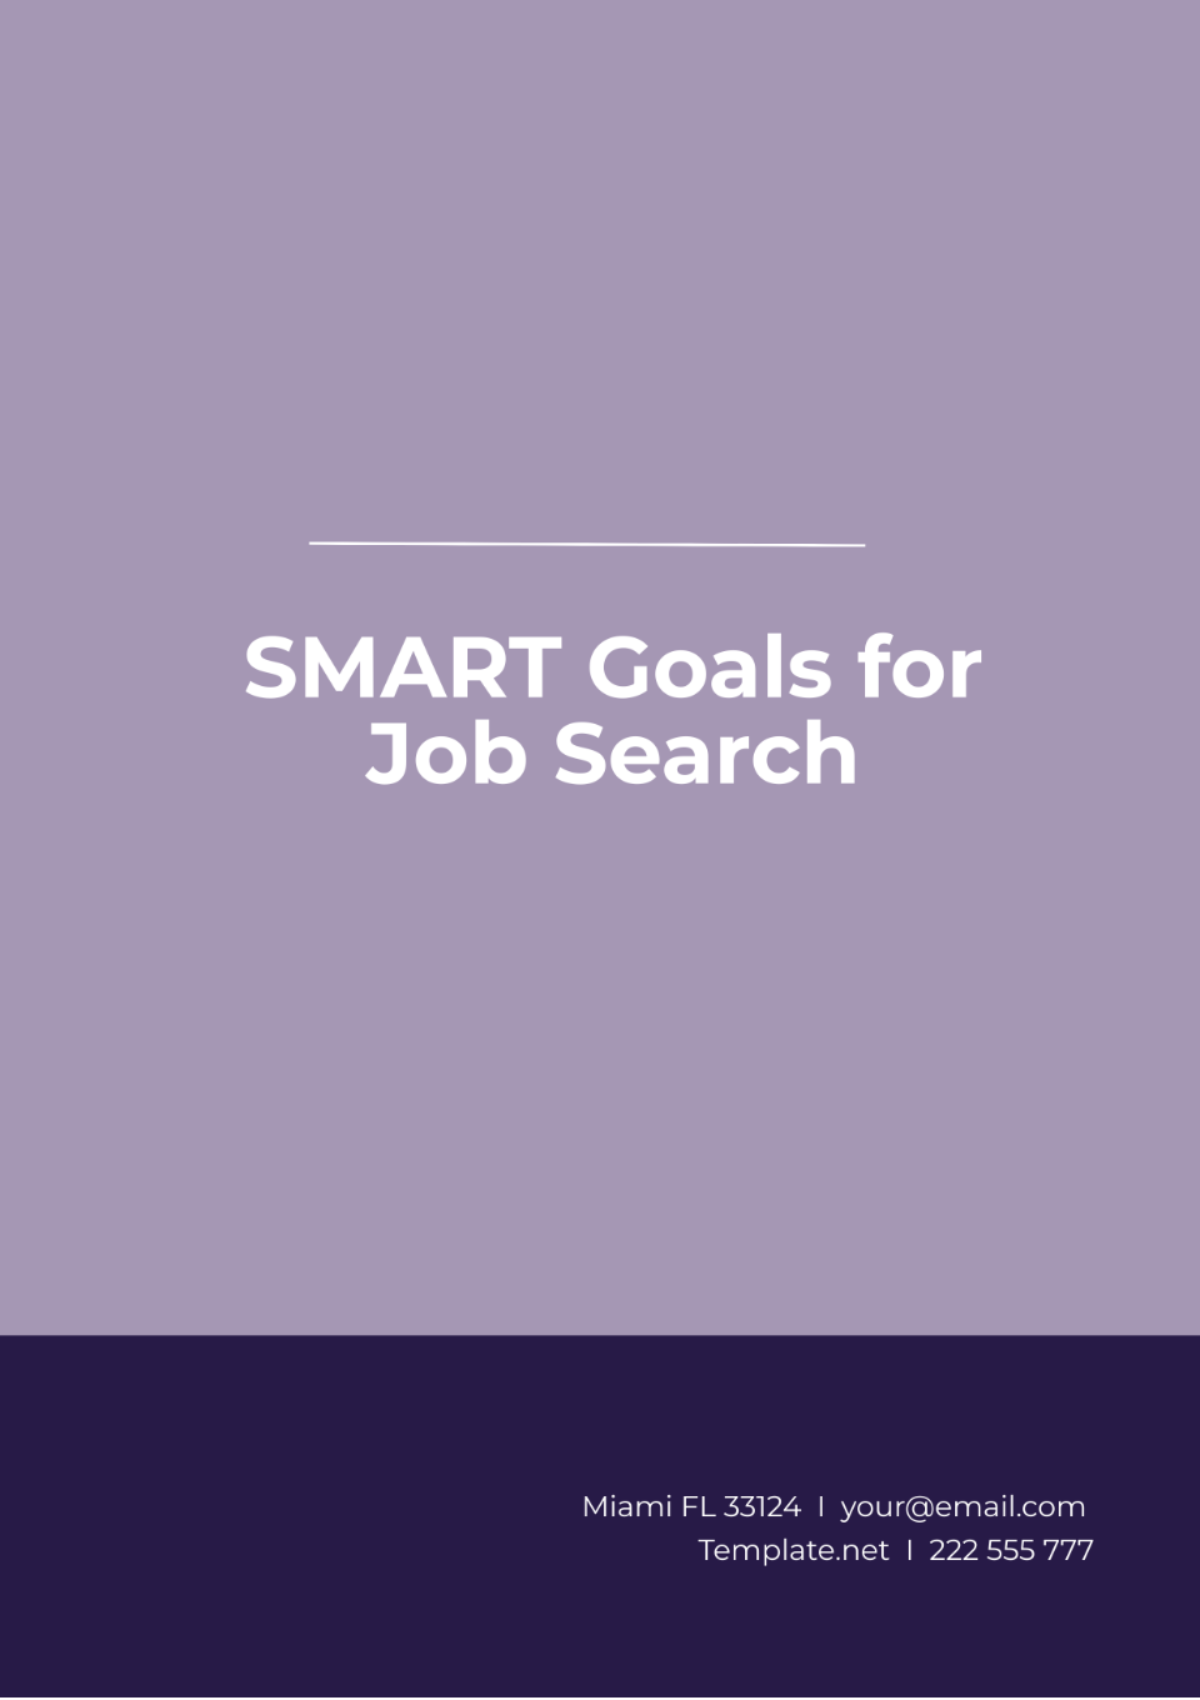 Free SMART Goals Template for Job Search